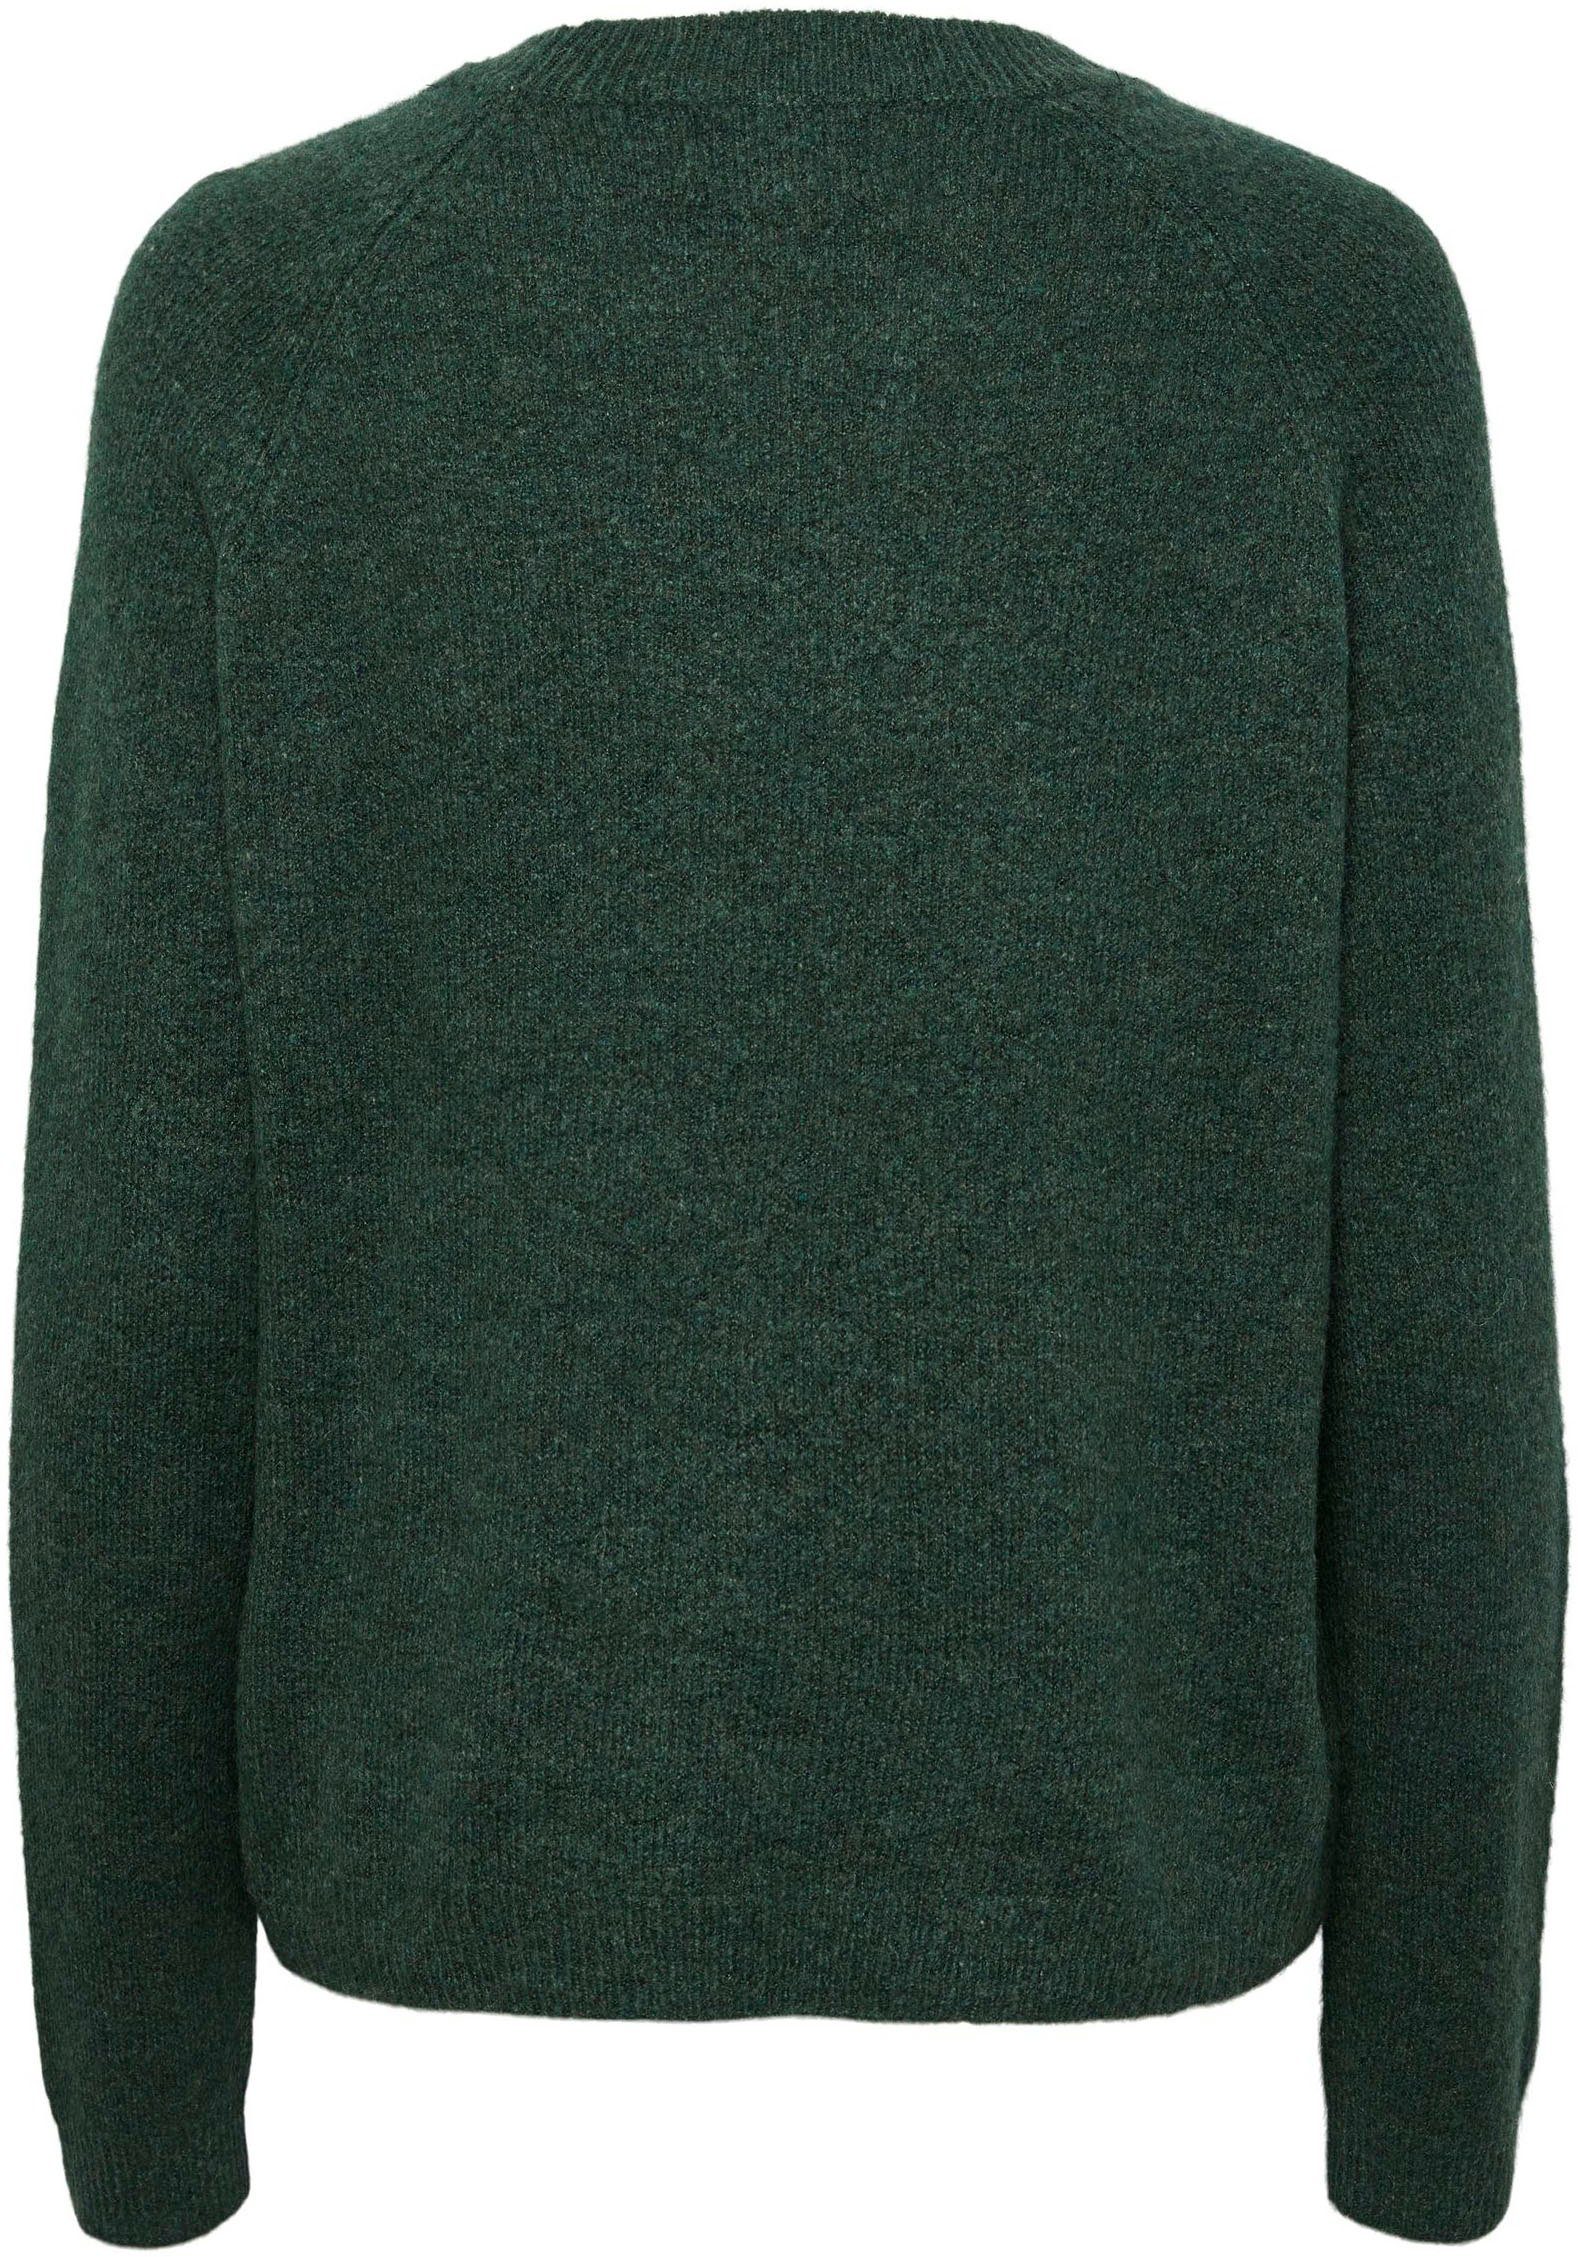 Green KNIT Strickpullover O-NECK pieces PCJULIANA Trekking LS BC NOOS